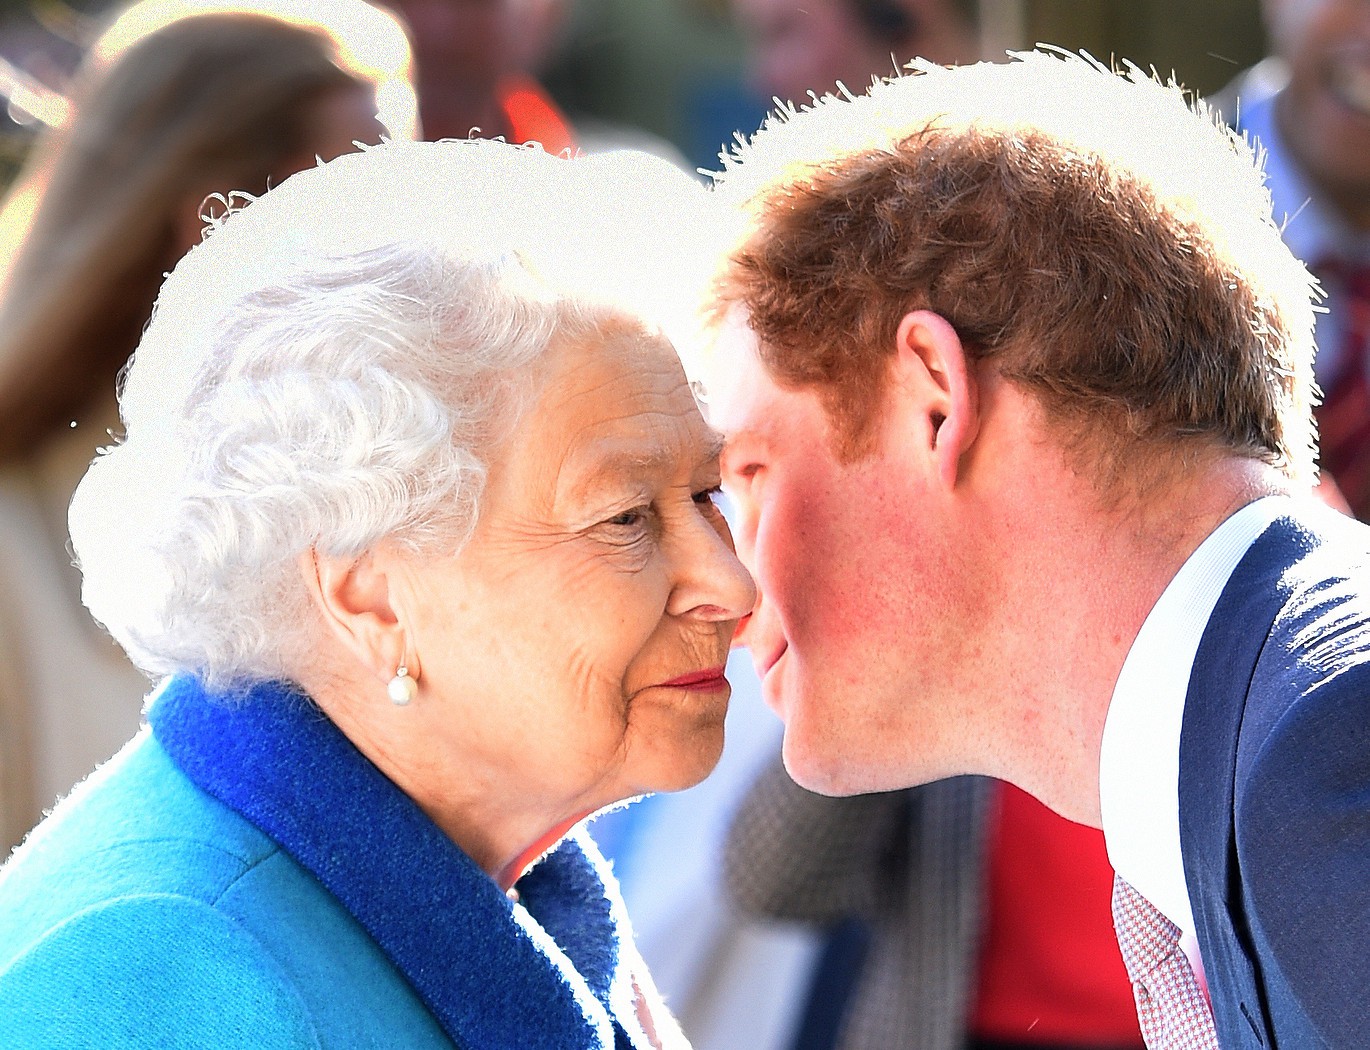 Prince Harry is pictured here with his grandmother the Queen, who this week agreed he could go live in Canada and step back from life as a royal